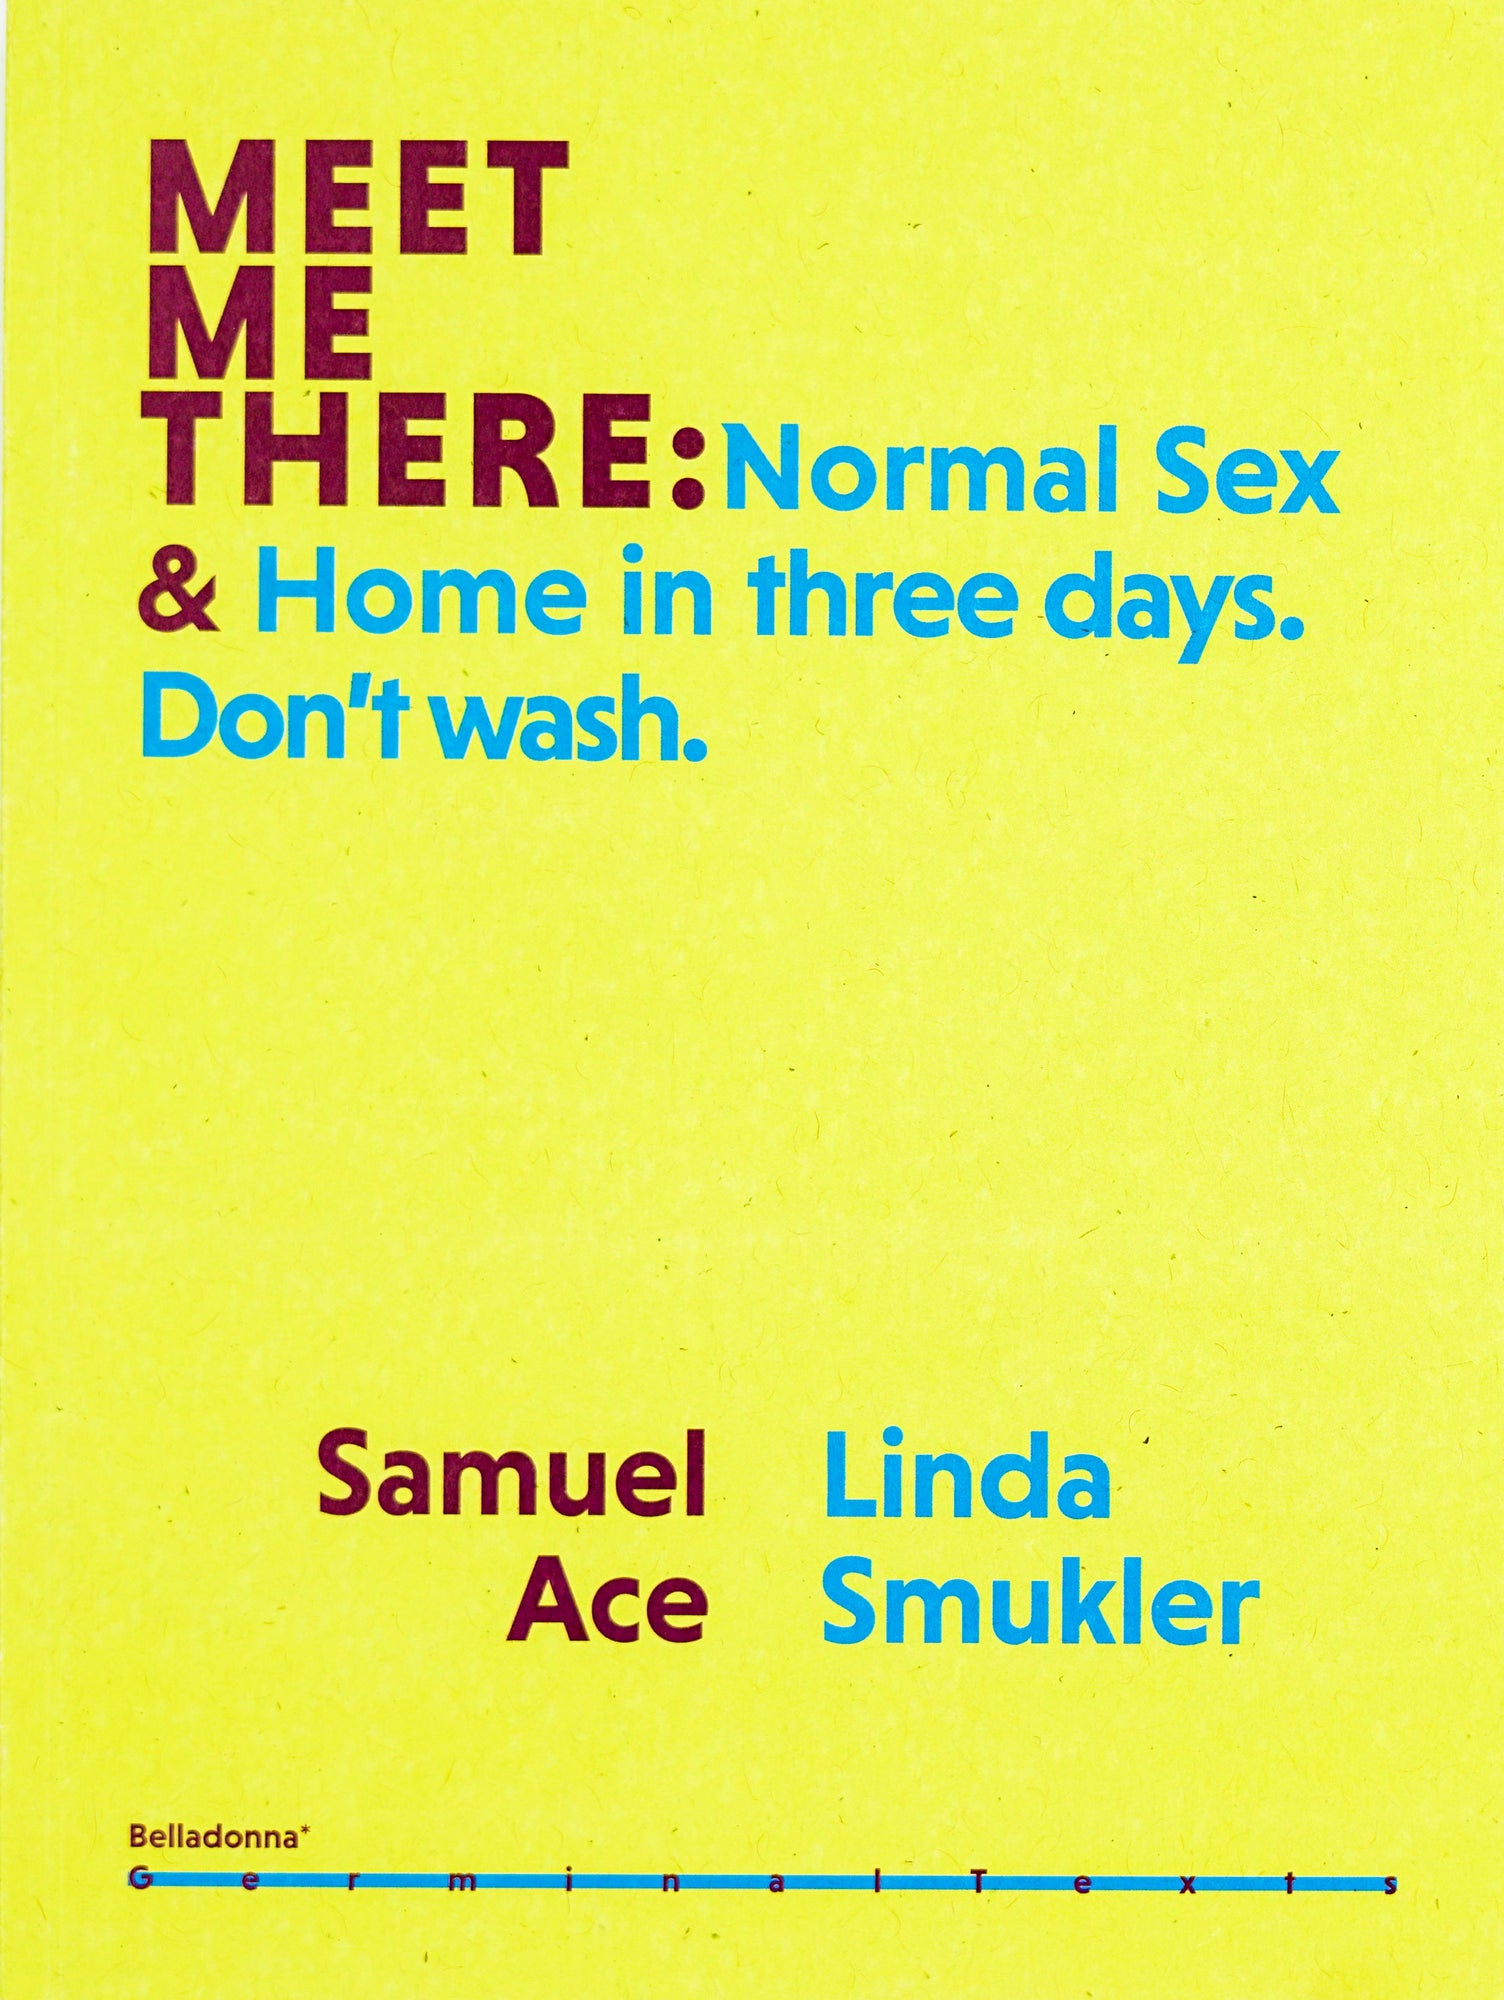 Book Cover in washed out yellow with the title in the upper third of the page. One half of the title “Meet Me There:“ is written in bold dark red sans serif, the other half “Normal Sex & Home in three days. Don’t wash.“ is written in light blue. The authors are written on the lower third of the page, Samuel Ace in sans serif dark red and Linda Smukler in light blue sans serif. 